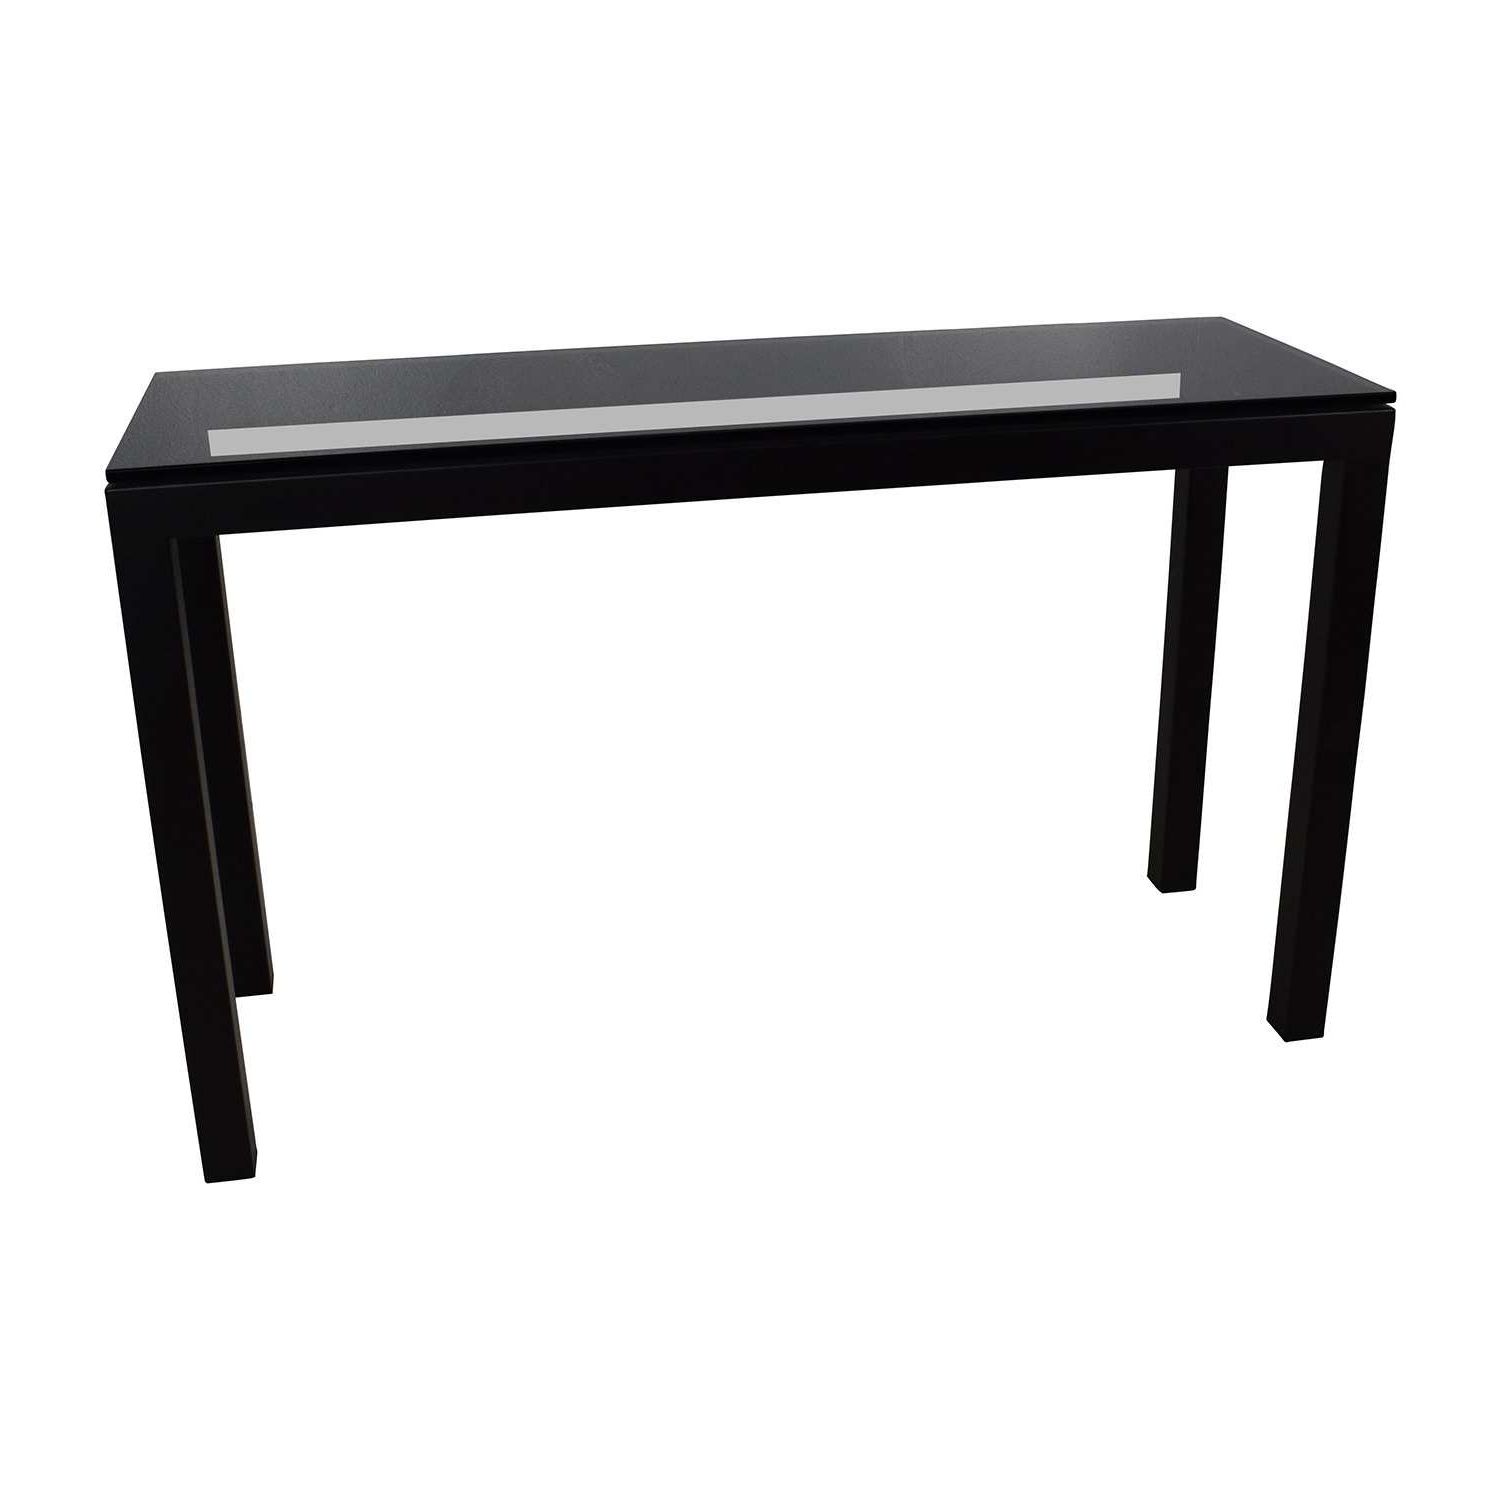 Newest 41 Elegant Collection Of Crate And Barrel Sofa Table (View 20 of 20)